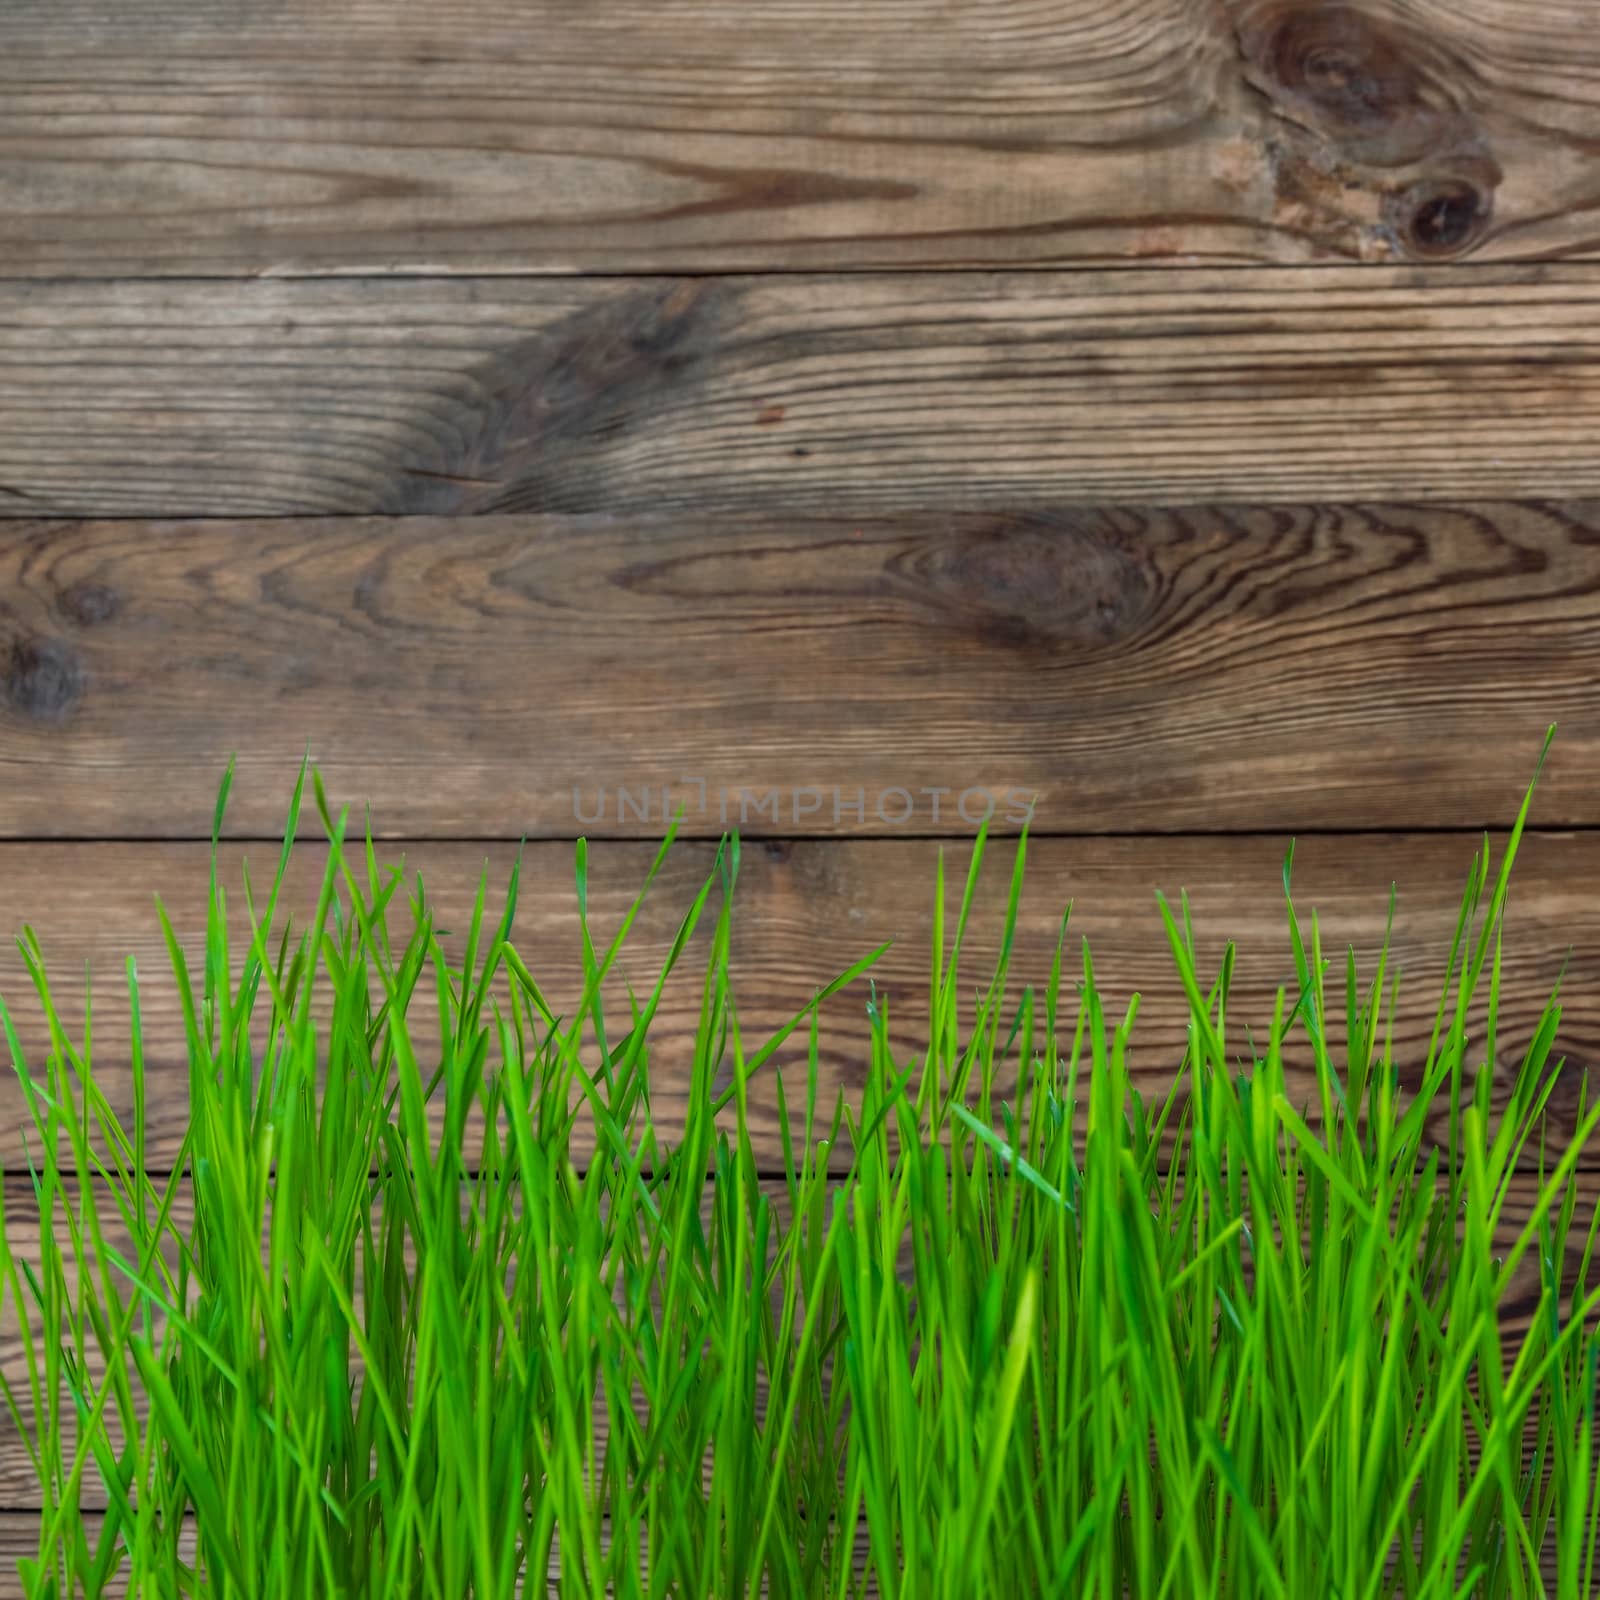 Rustic background with green grass